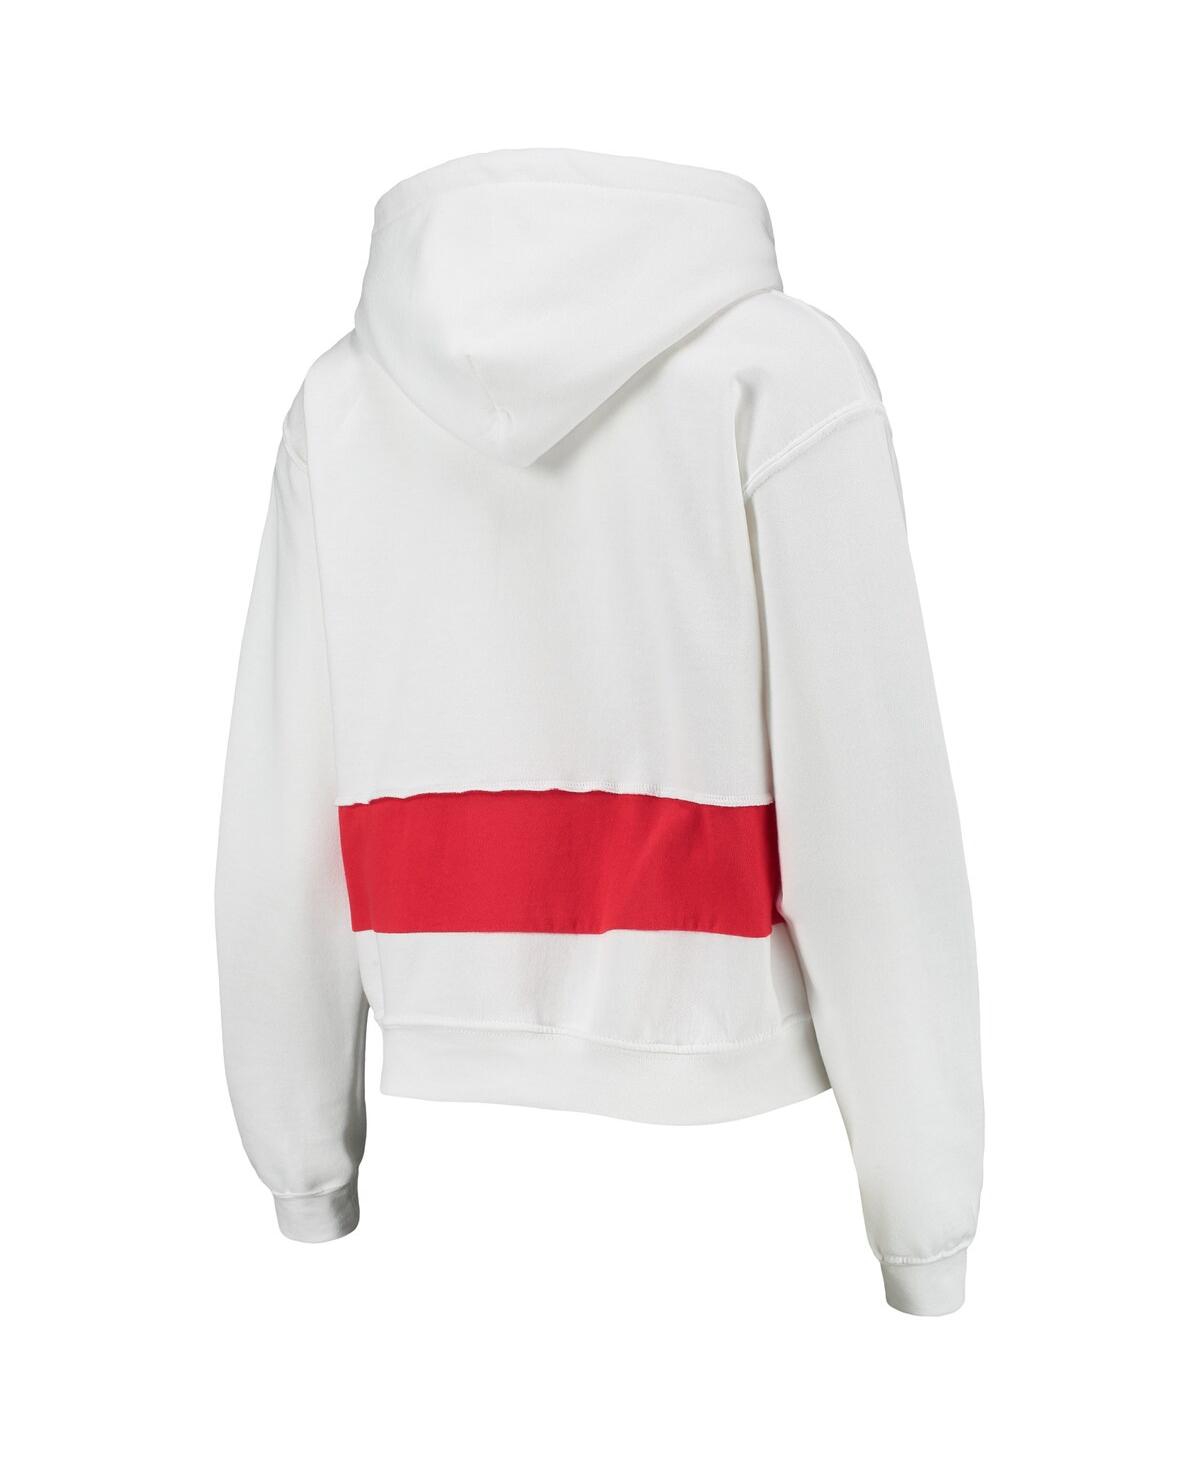 Refried Apparel Women's Refried Apparel White/Red St. Louis Cardinals  Cropped Pullover Hoodie